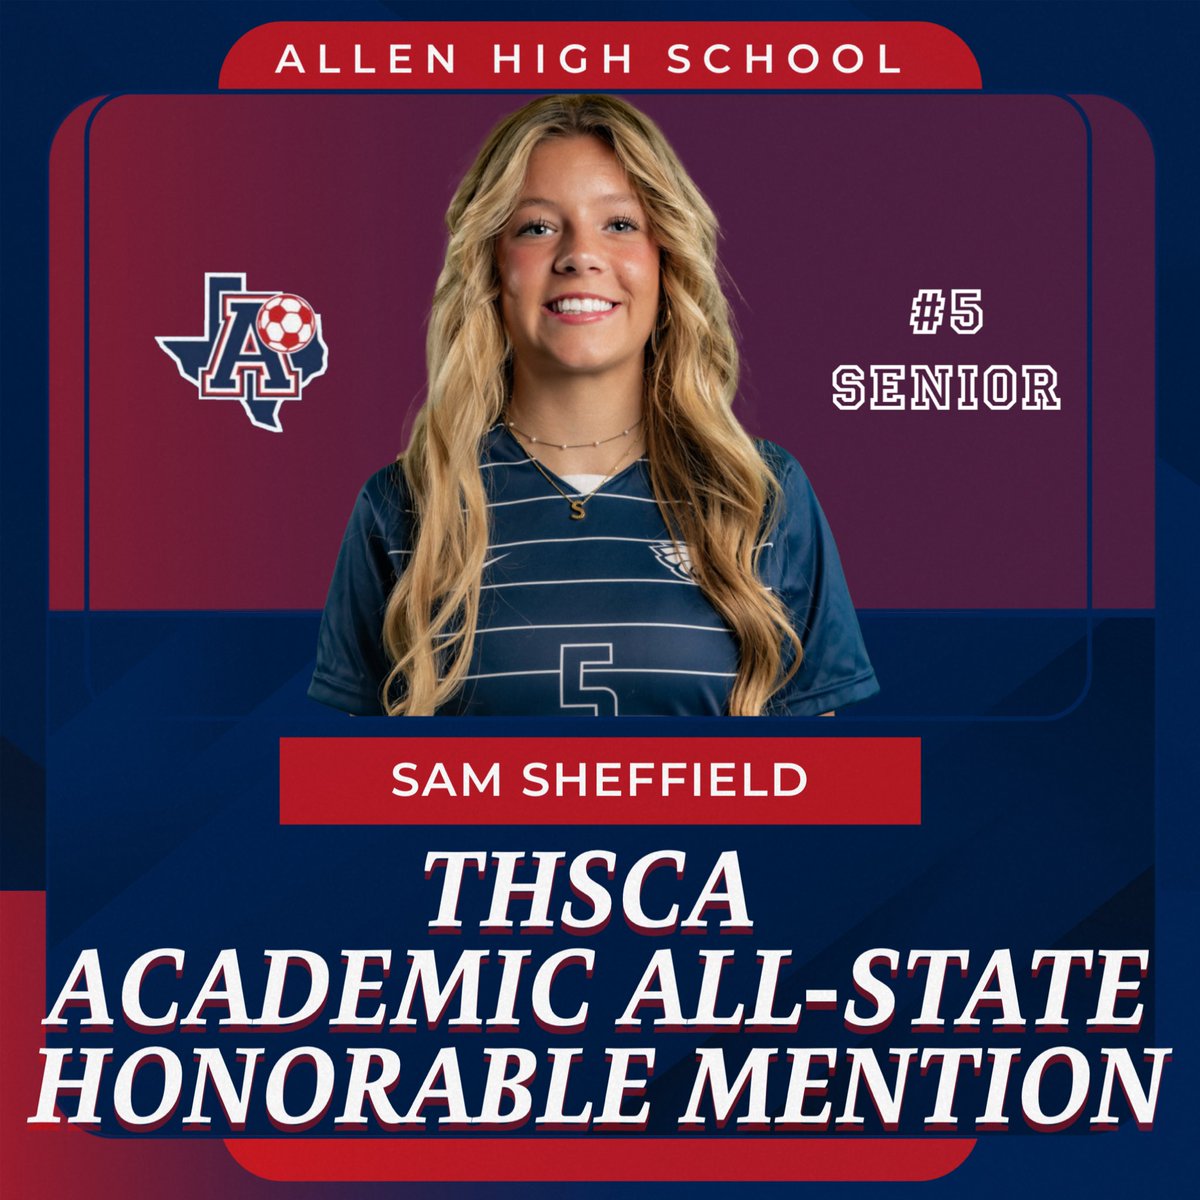 Congrats to our THSCA Academic All State Honorable Mention players:

Sr. Jillian Anderson
Sr. Sam Sheffield